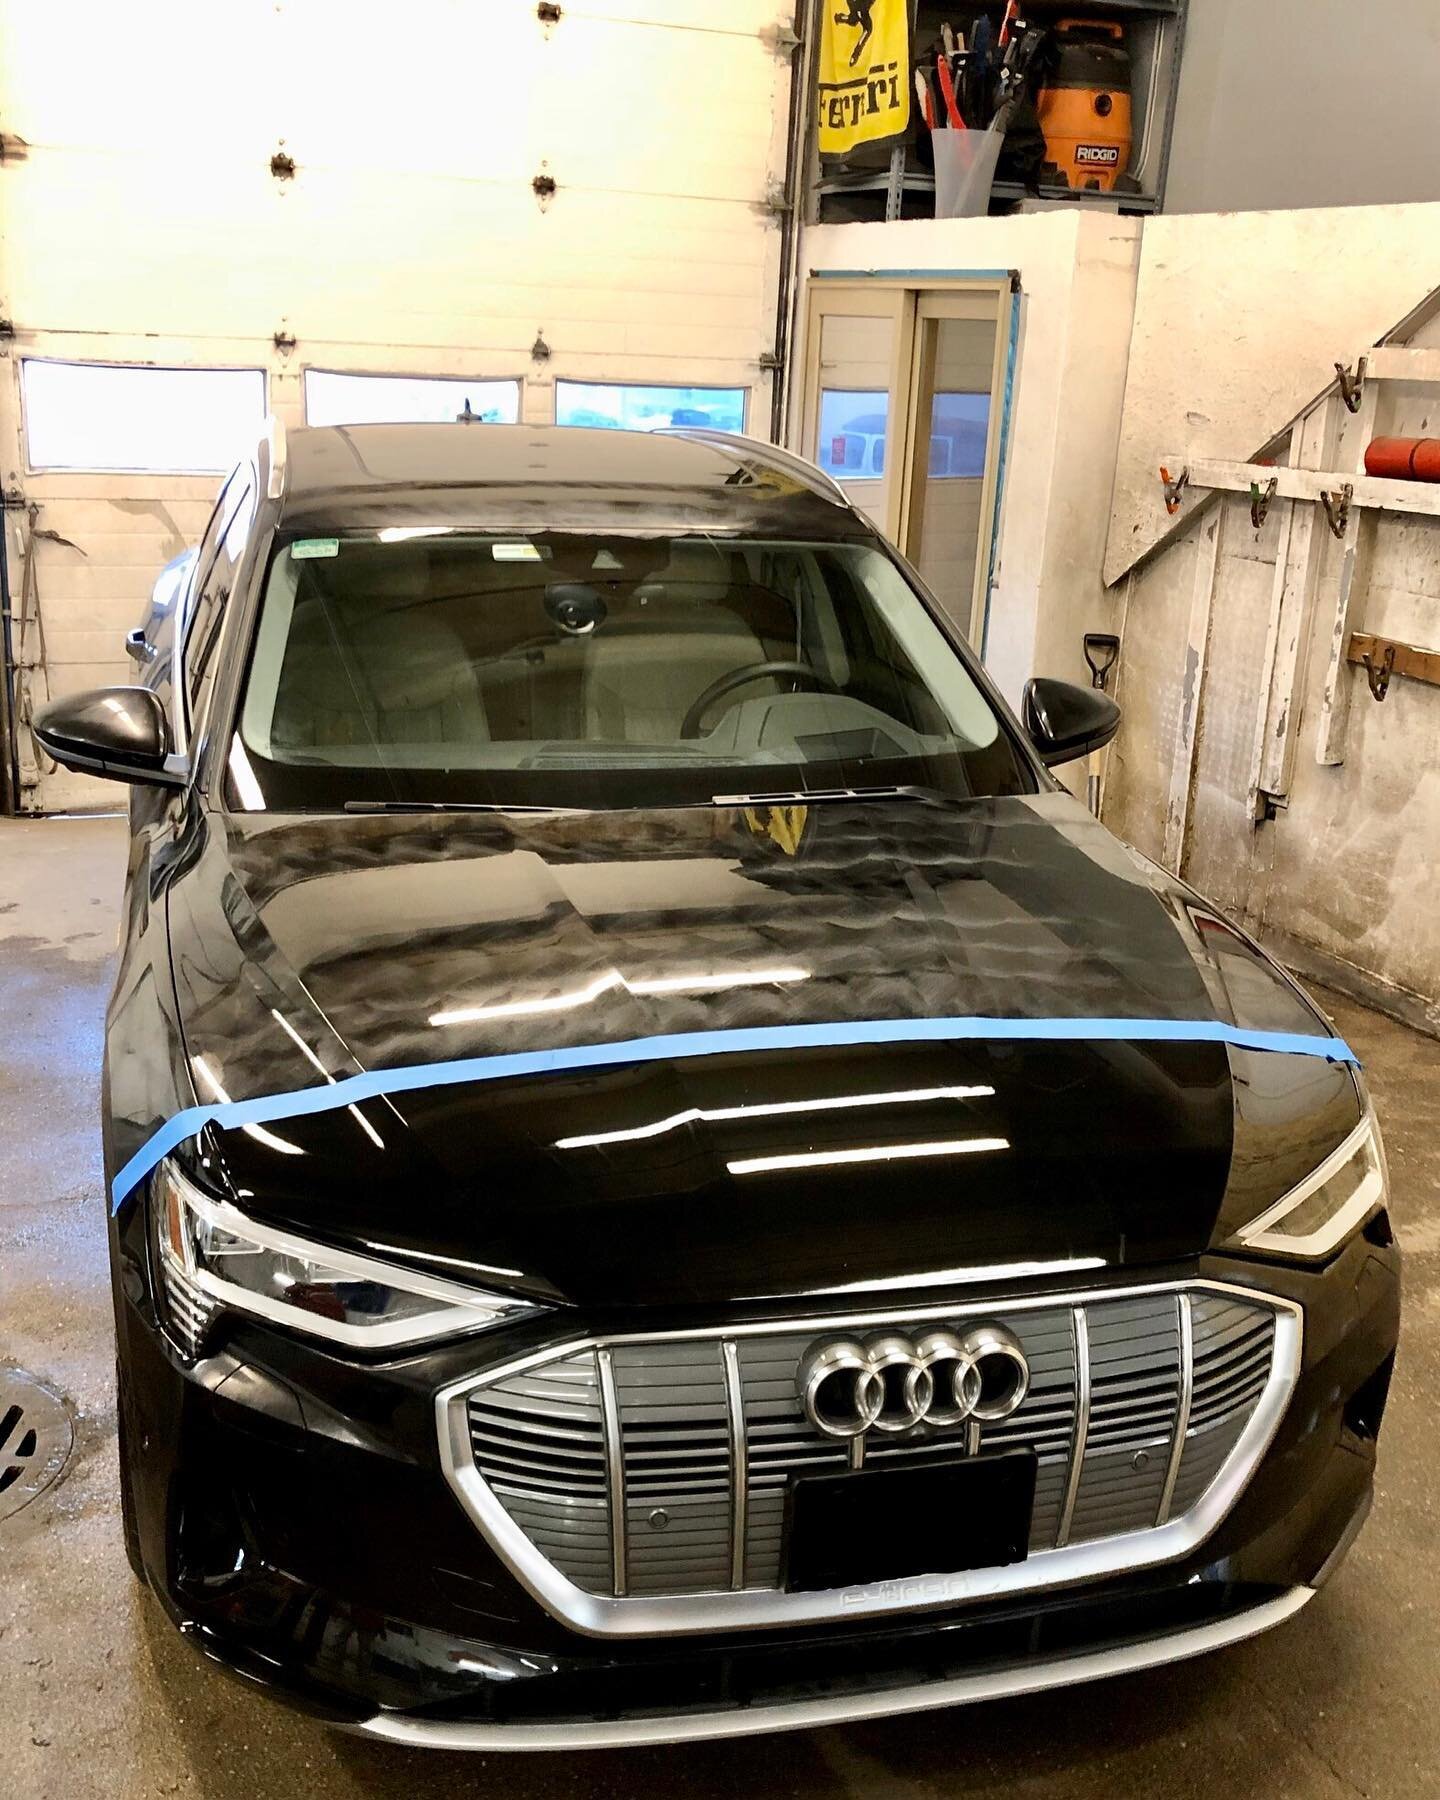 THE AFTER!!!! Just finished the Audi A4 2019 with a fresh new 3-6 months wax and a new clear bra hood and fenders to keep that extra protection!!! You can barleyyyy see the clear bra exactly how it&rsquo;s suppose to be!!! 🧽🧼👀 #DetailsPlusAuto #De